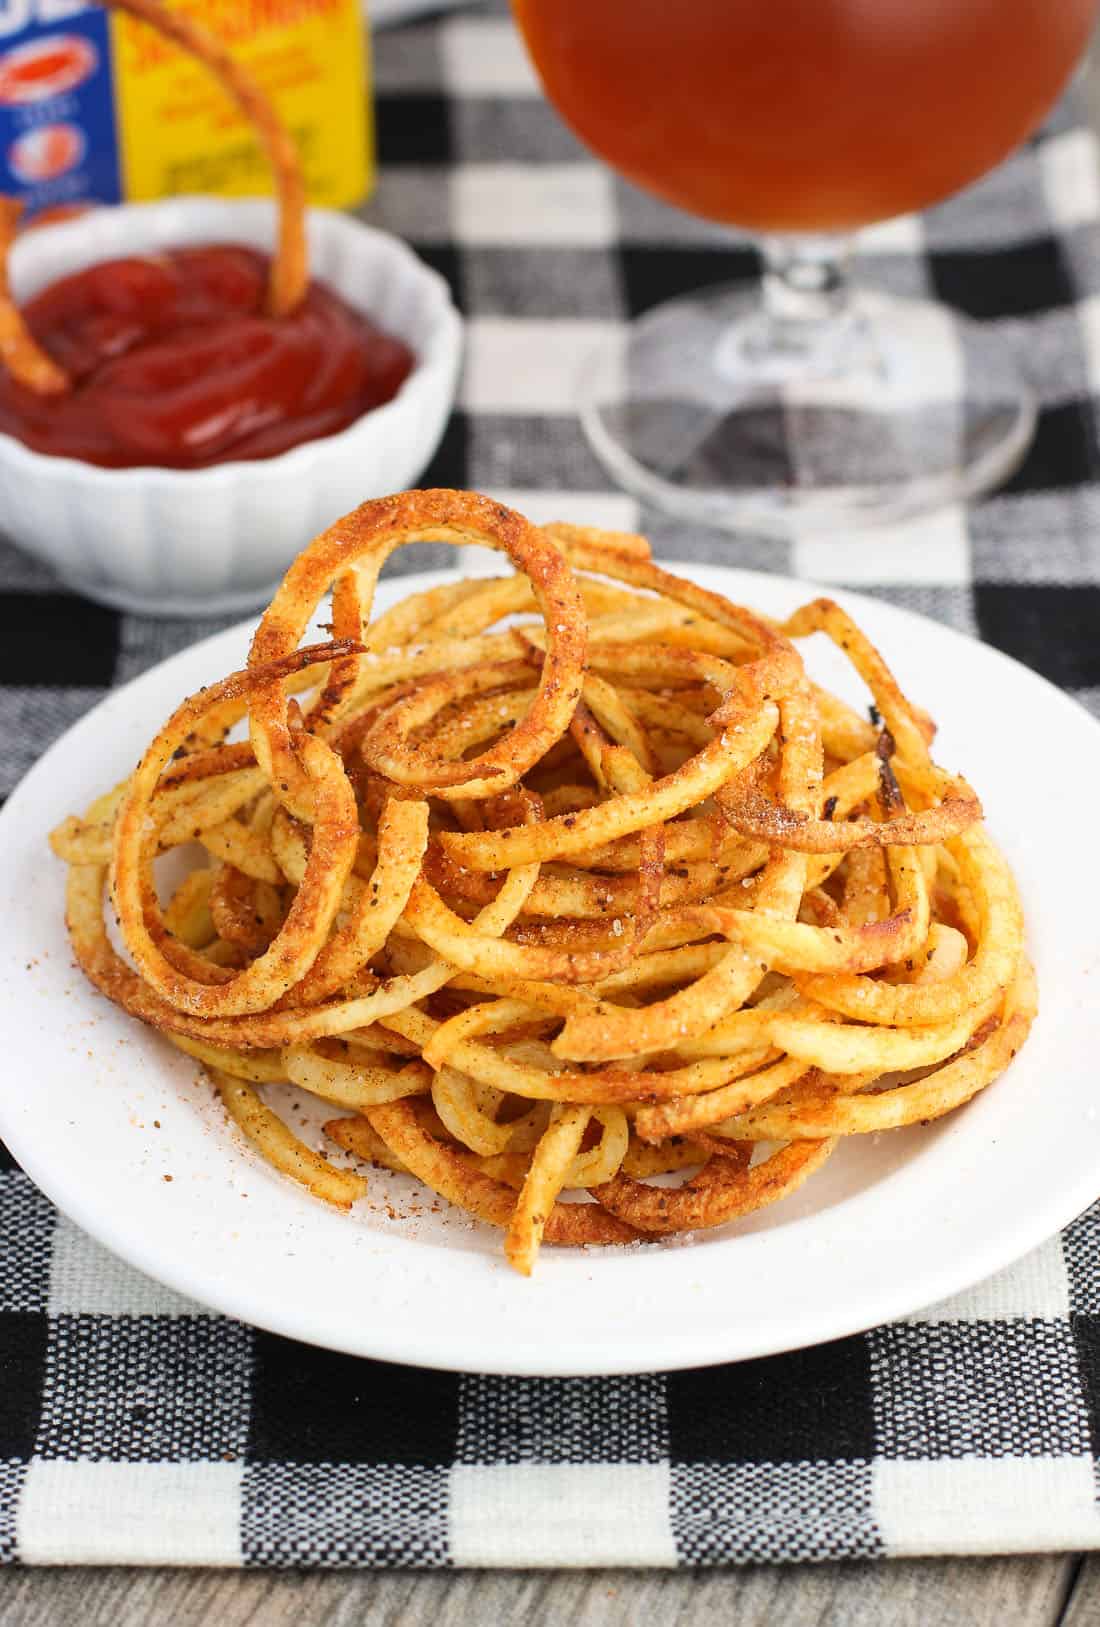 Fries on a plate with a small bowl of ketchup in the background.